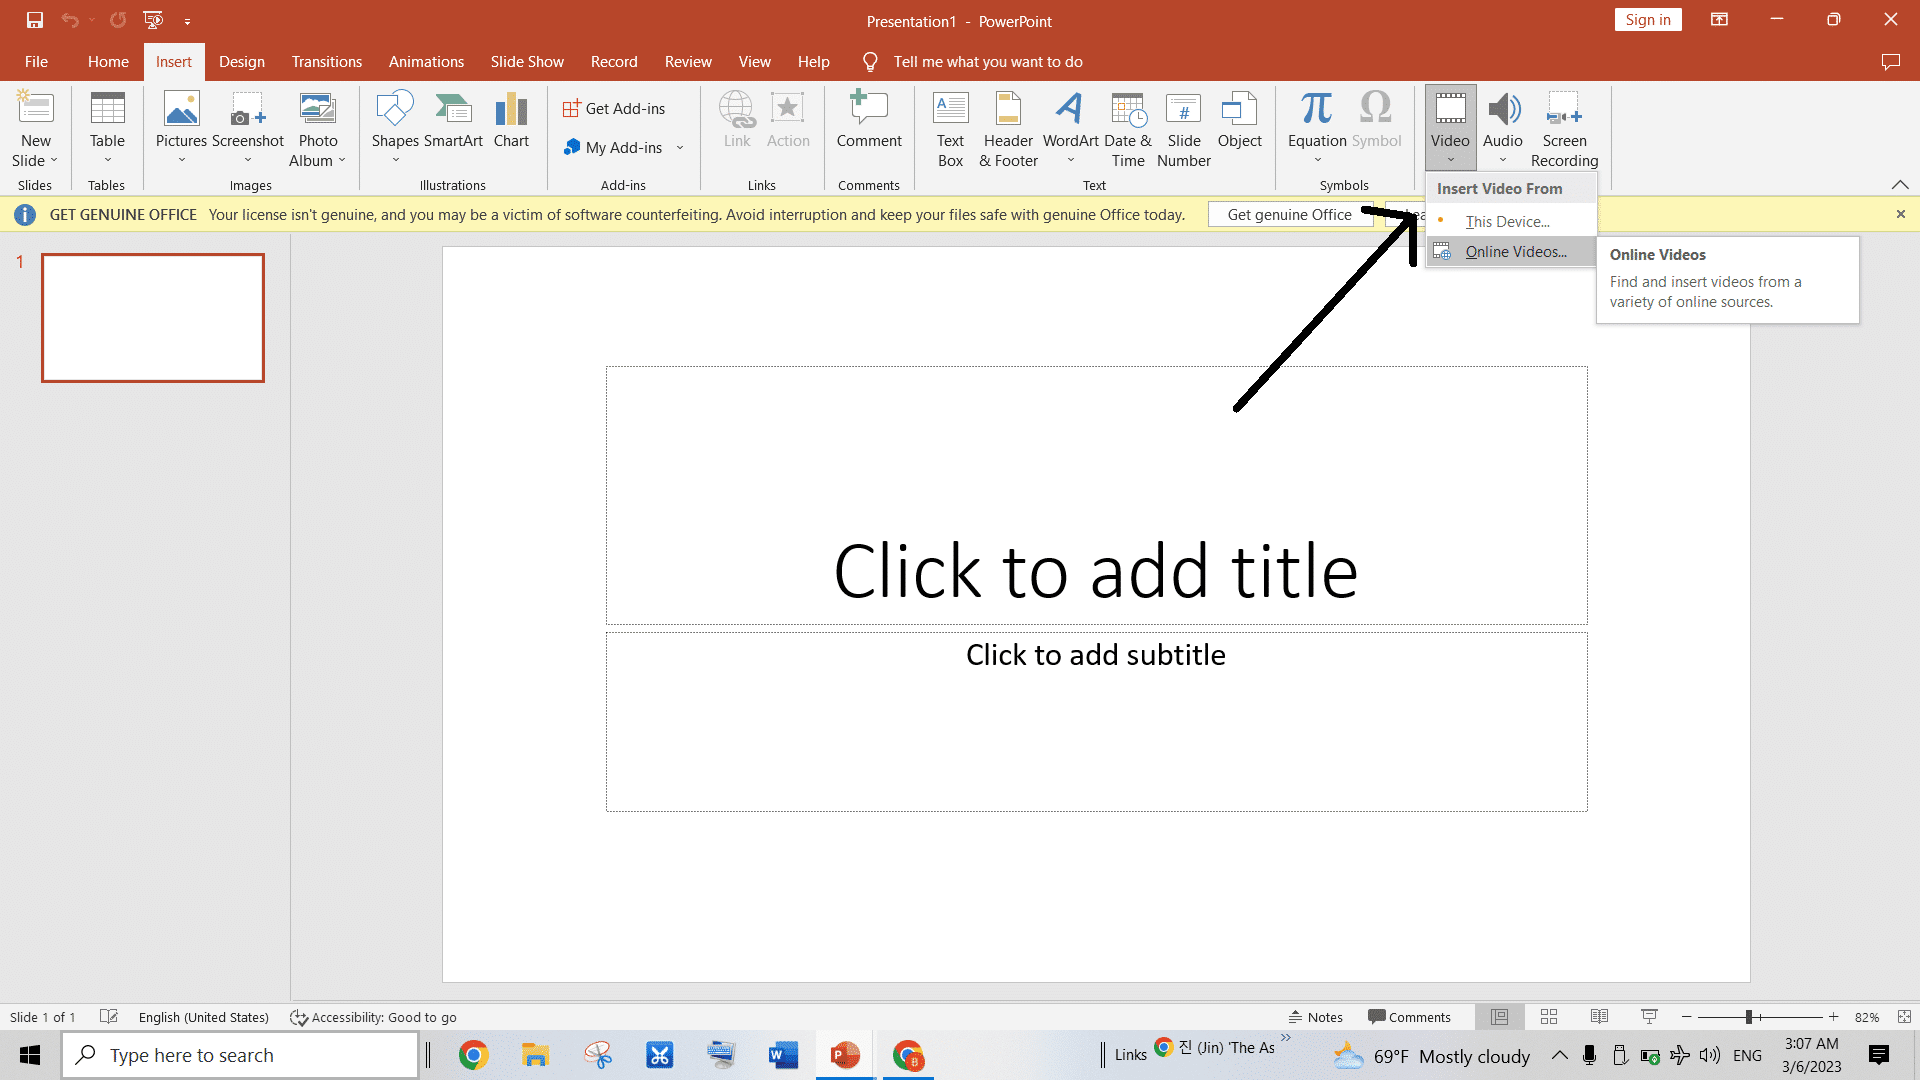 Open PowerPoint, click Insert, then Video and Online Video.